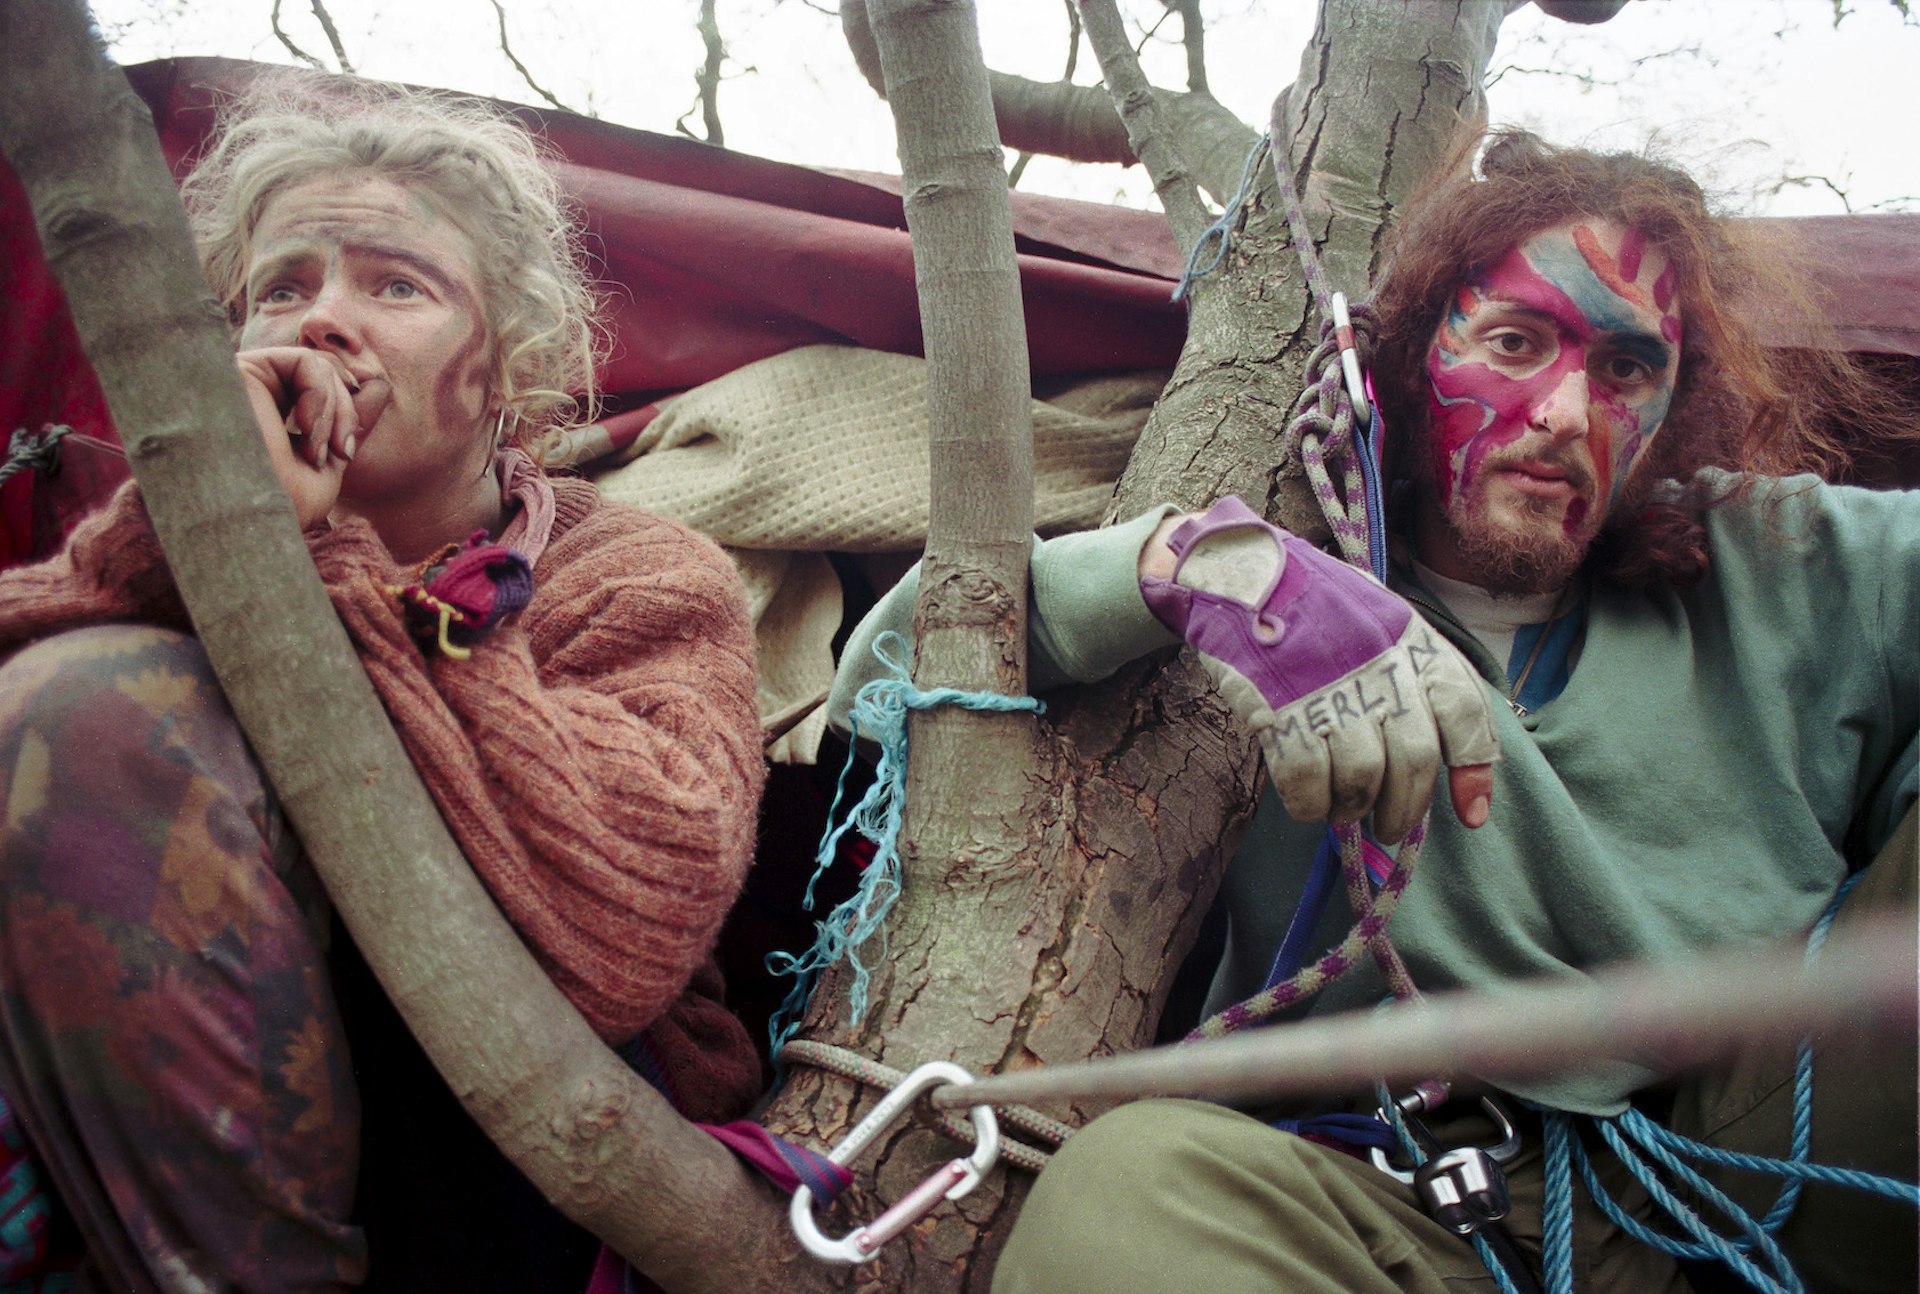 Photos of UK activists occupying tree tops in the ’90s